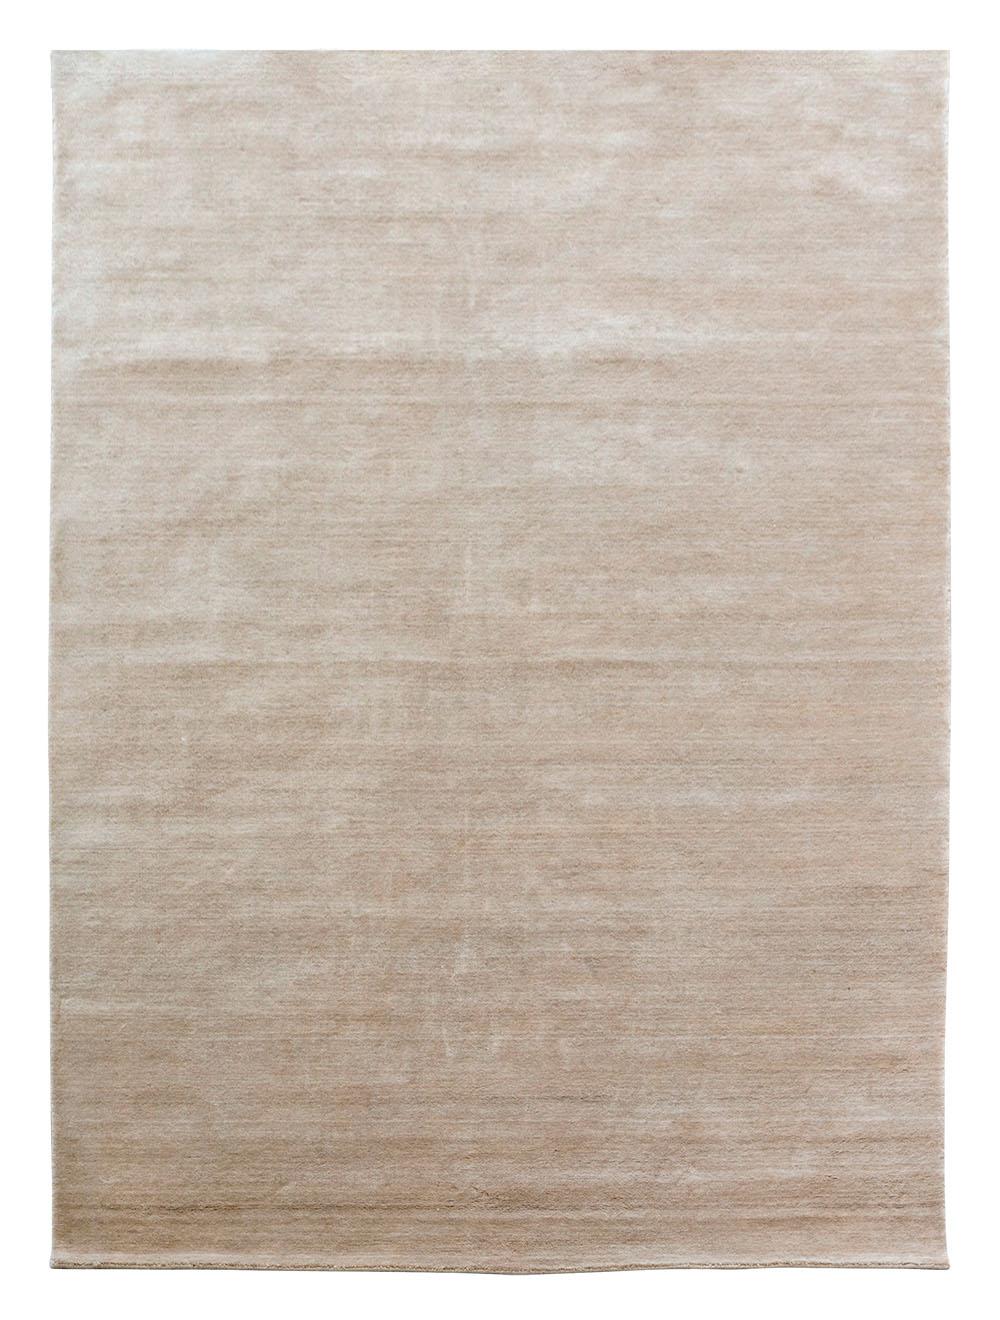 Desert sand earth bamboo carpet by Massimo Copenhagen
Handwoven
Materials: 50% New Zealand Wool, 50% Bamboo
Dimensions: W 300 x H 400 cm
Available colors: Nougat Rose, Cashmere, Soft Grey, Concrete, Warm Grey, Mustard Yellow, Vibrant Blue,